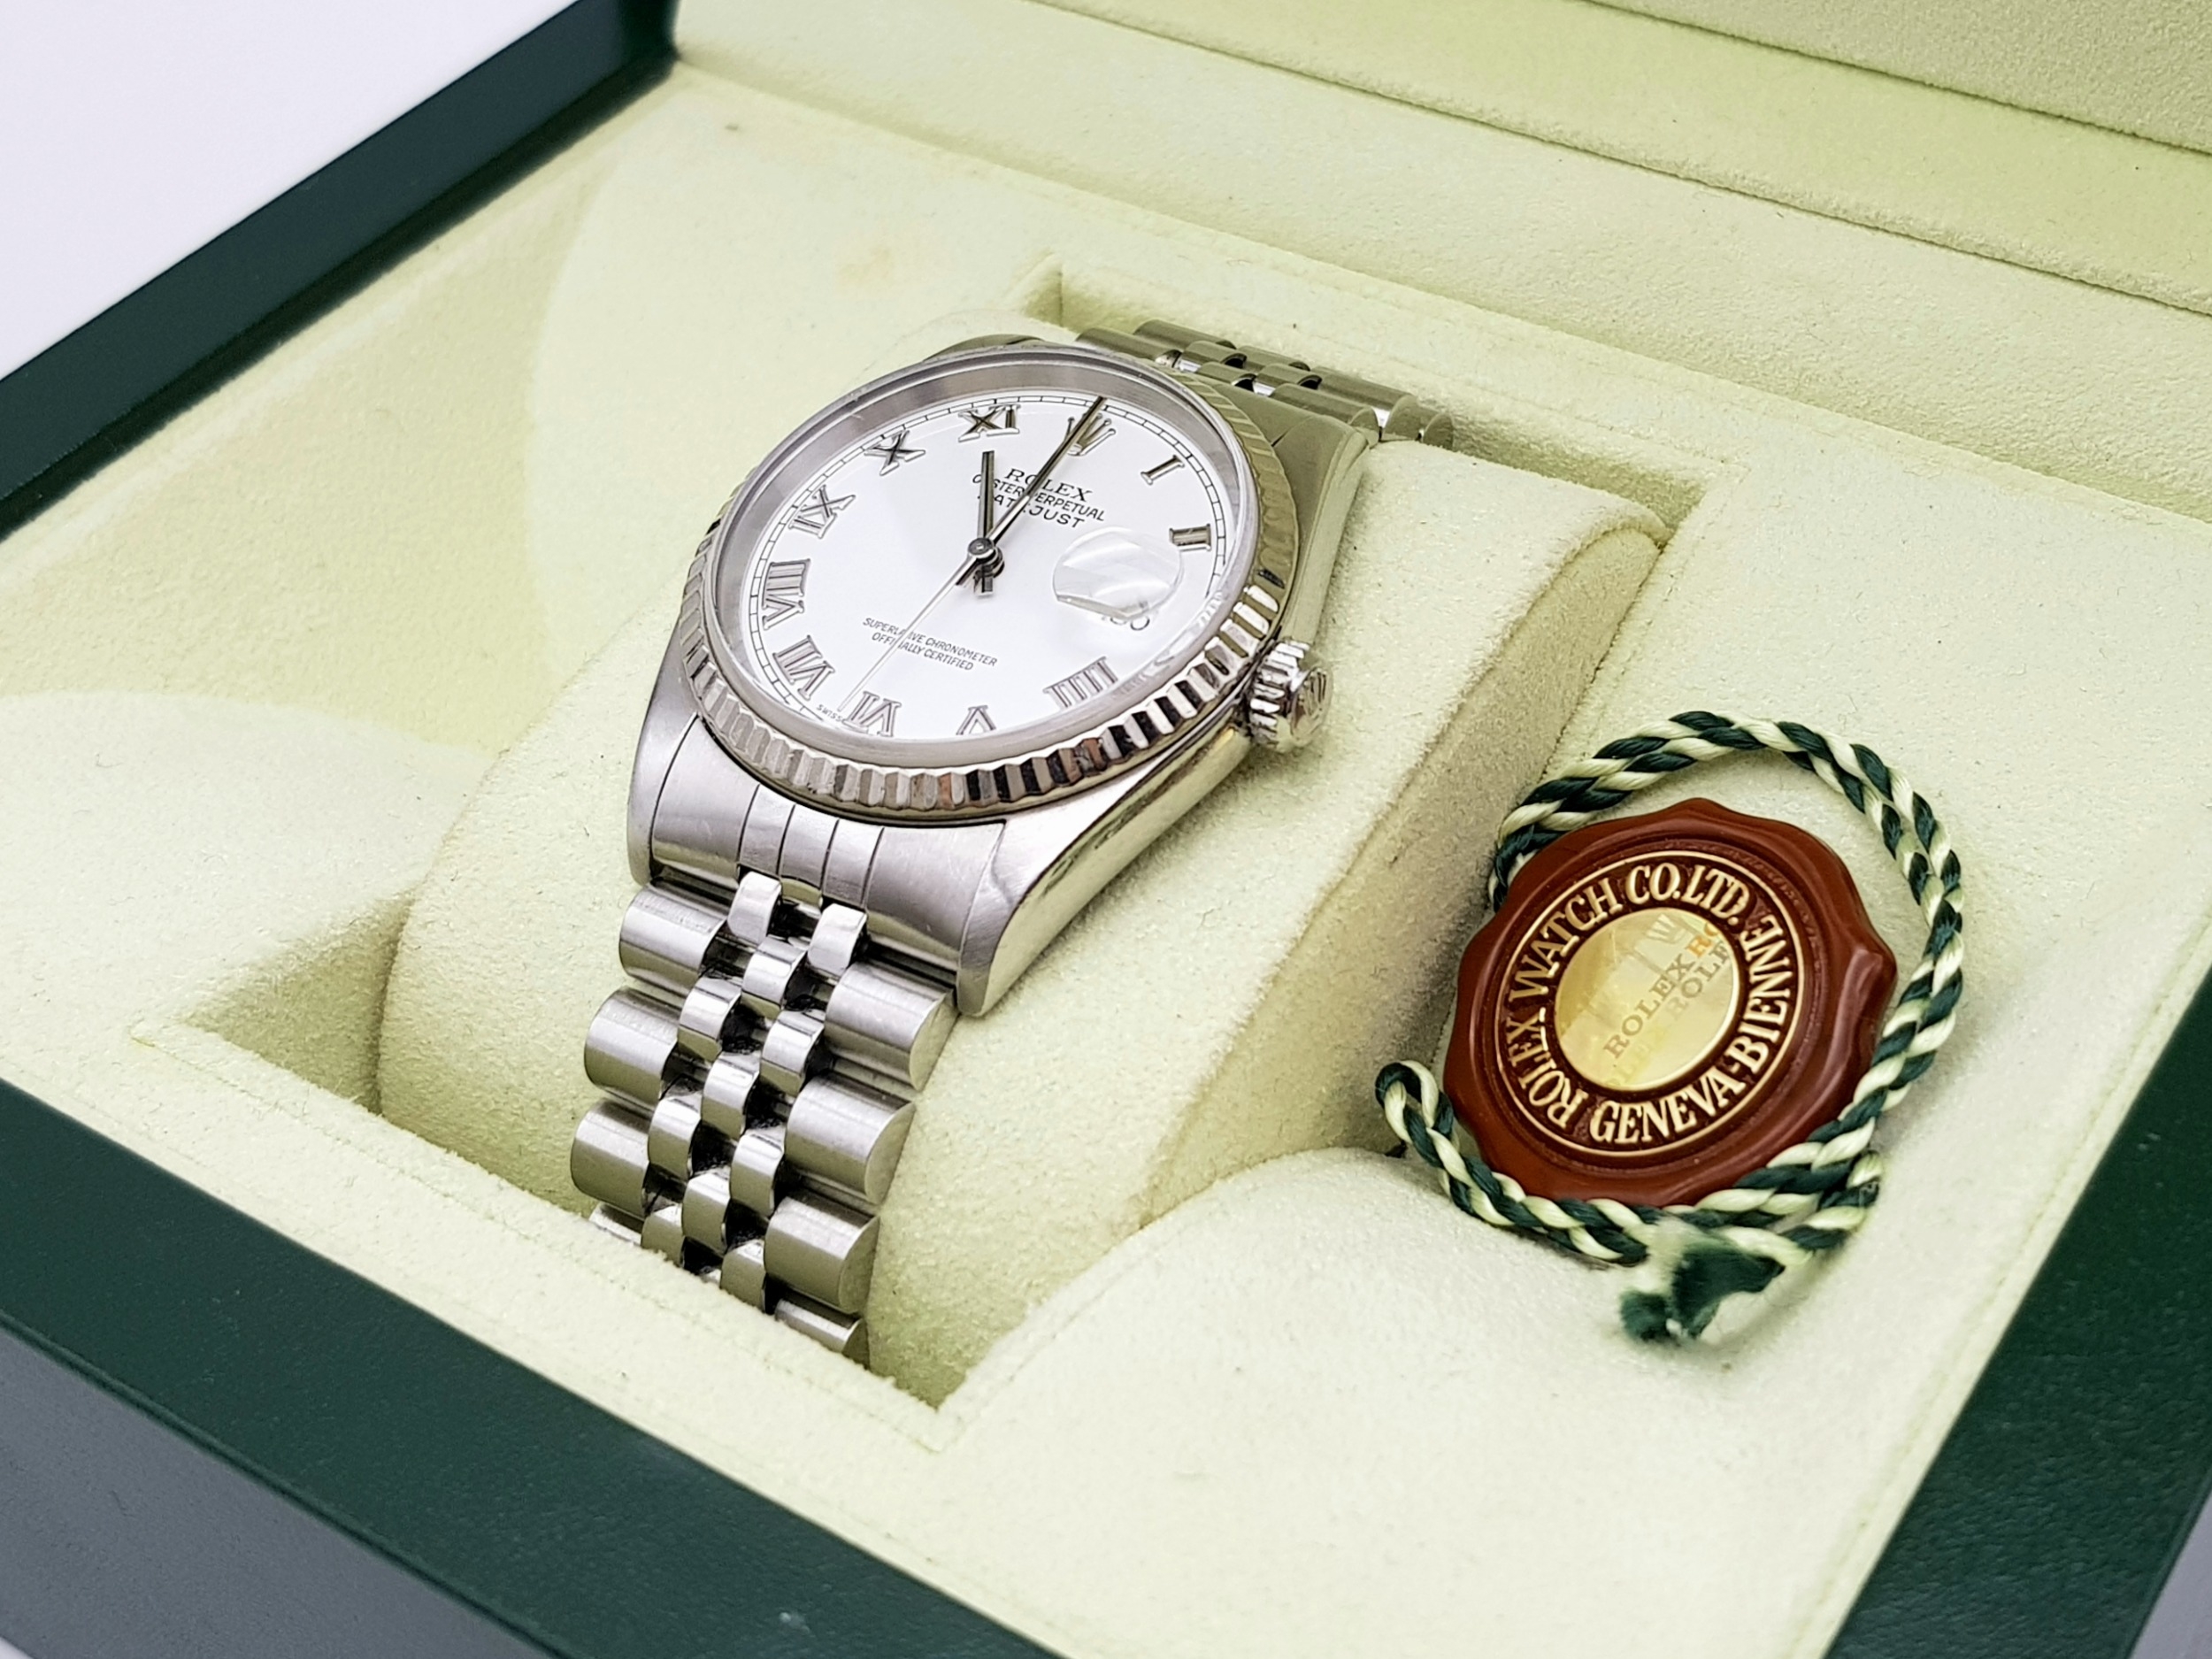 A ROLEX OYSTER PERPETUAL DATEJUST GENTS WATCH IN STAINLESS STEEL WITH WHITE DIAL AND ROMAN - Image 7 of 9